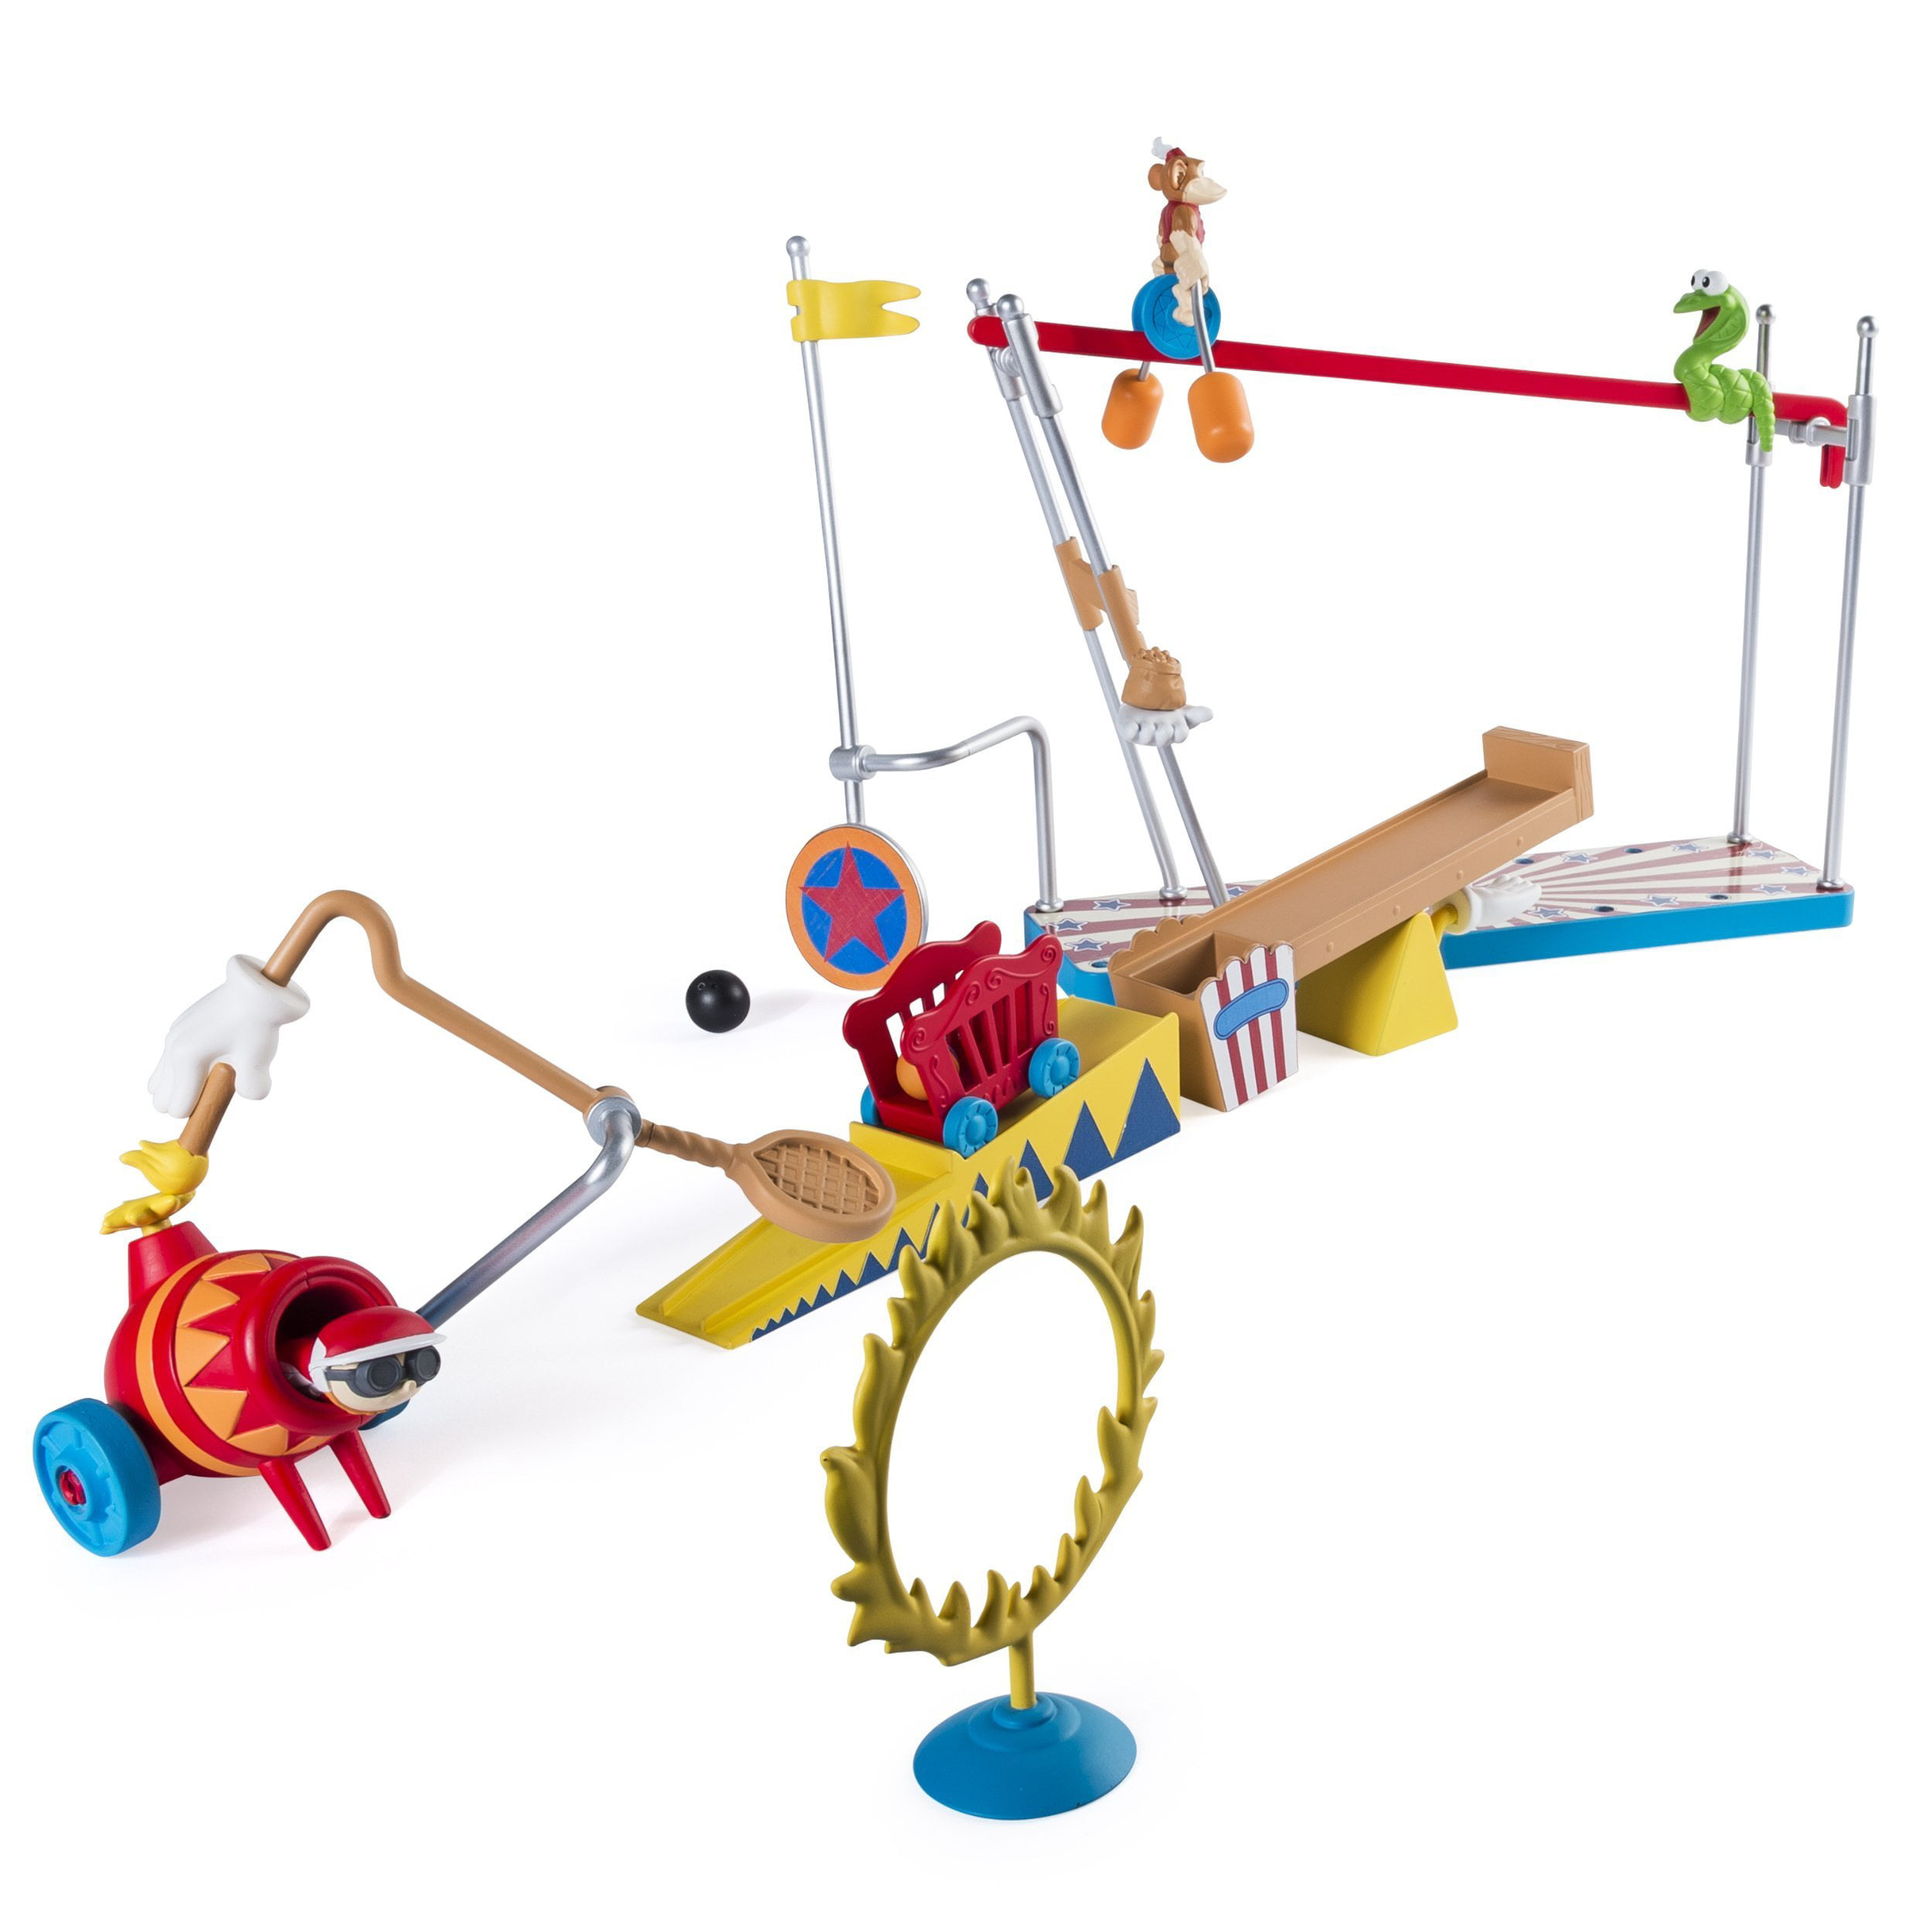 Wonderology Rube Goldberg The Acrobat Challenge Learning Action Toy for sale online 